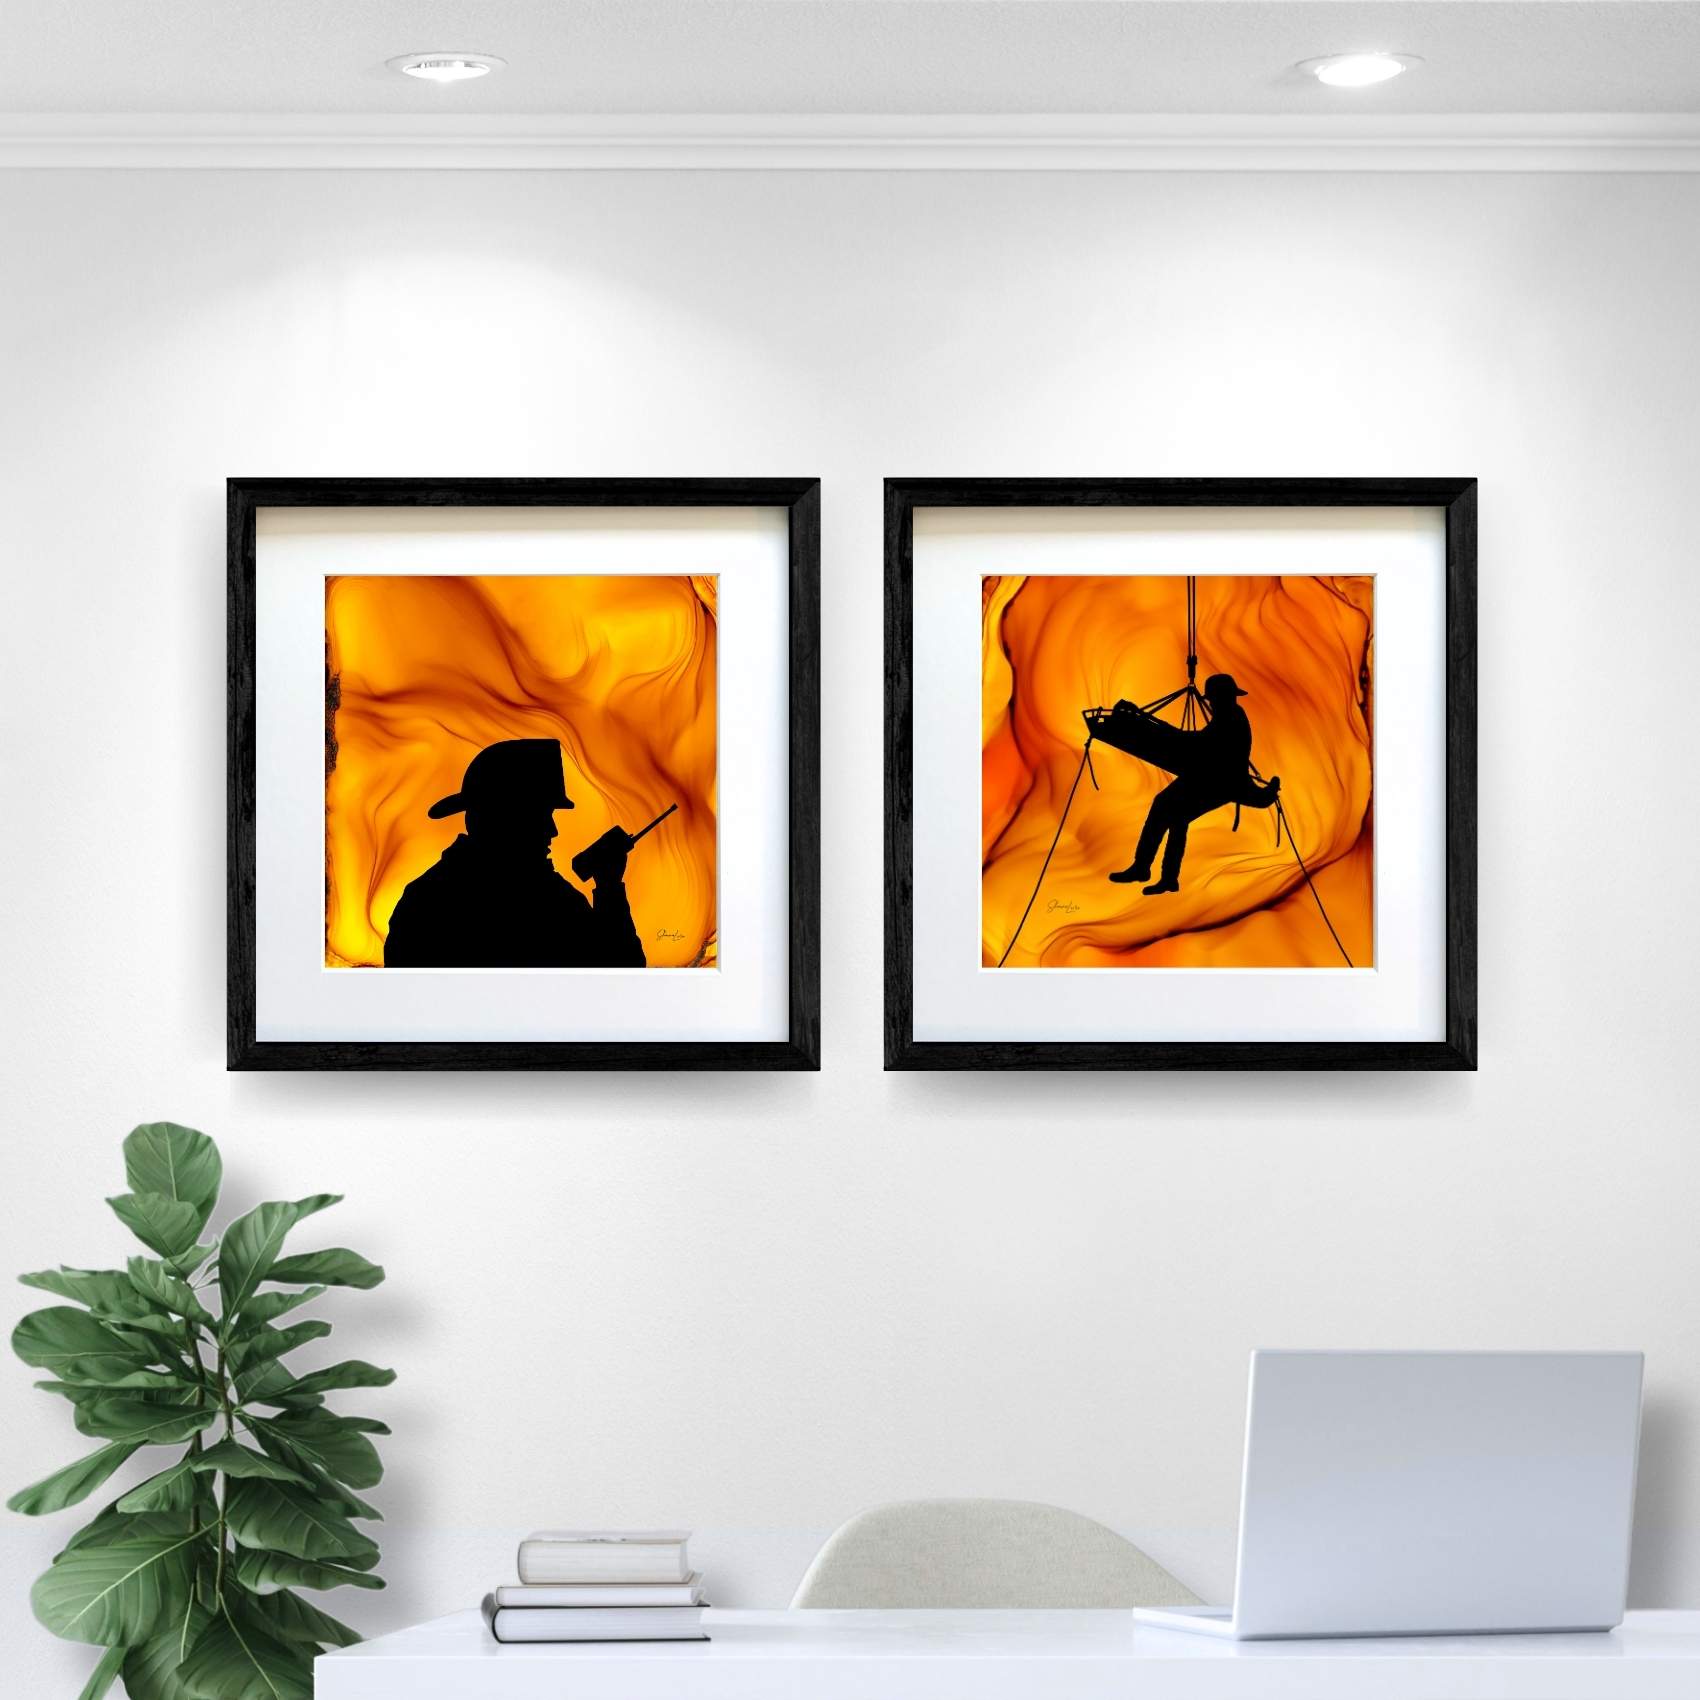 Chief In Action - Fire Made Art Print